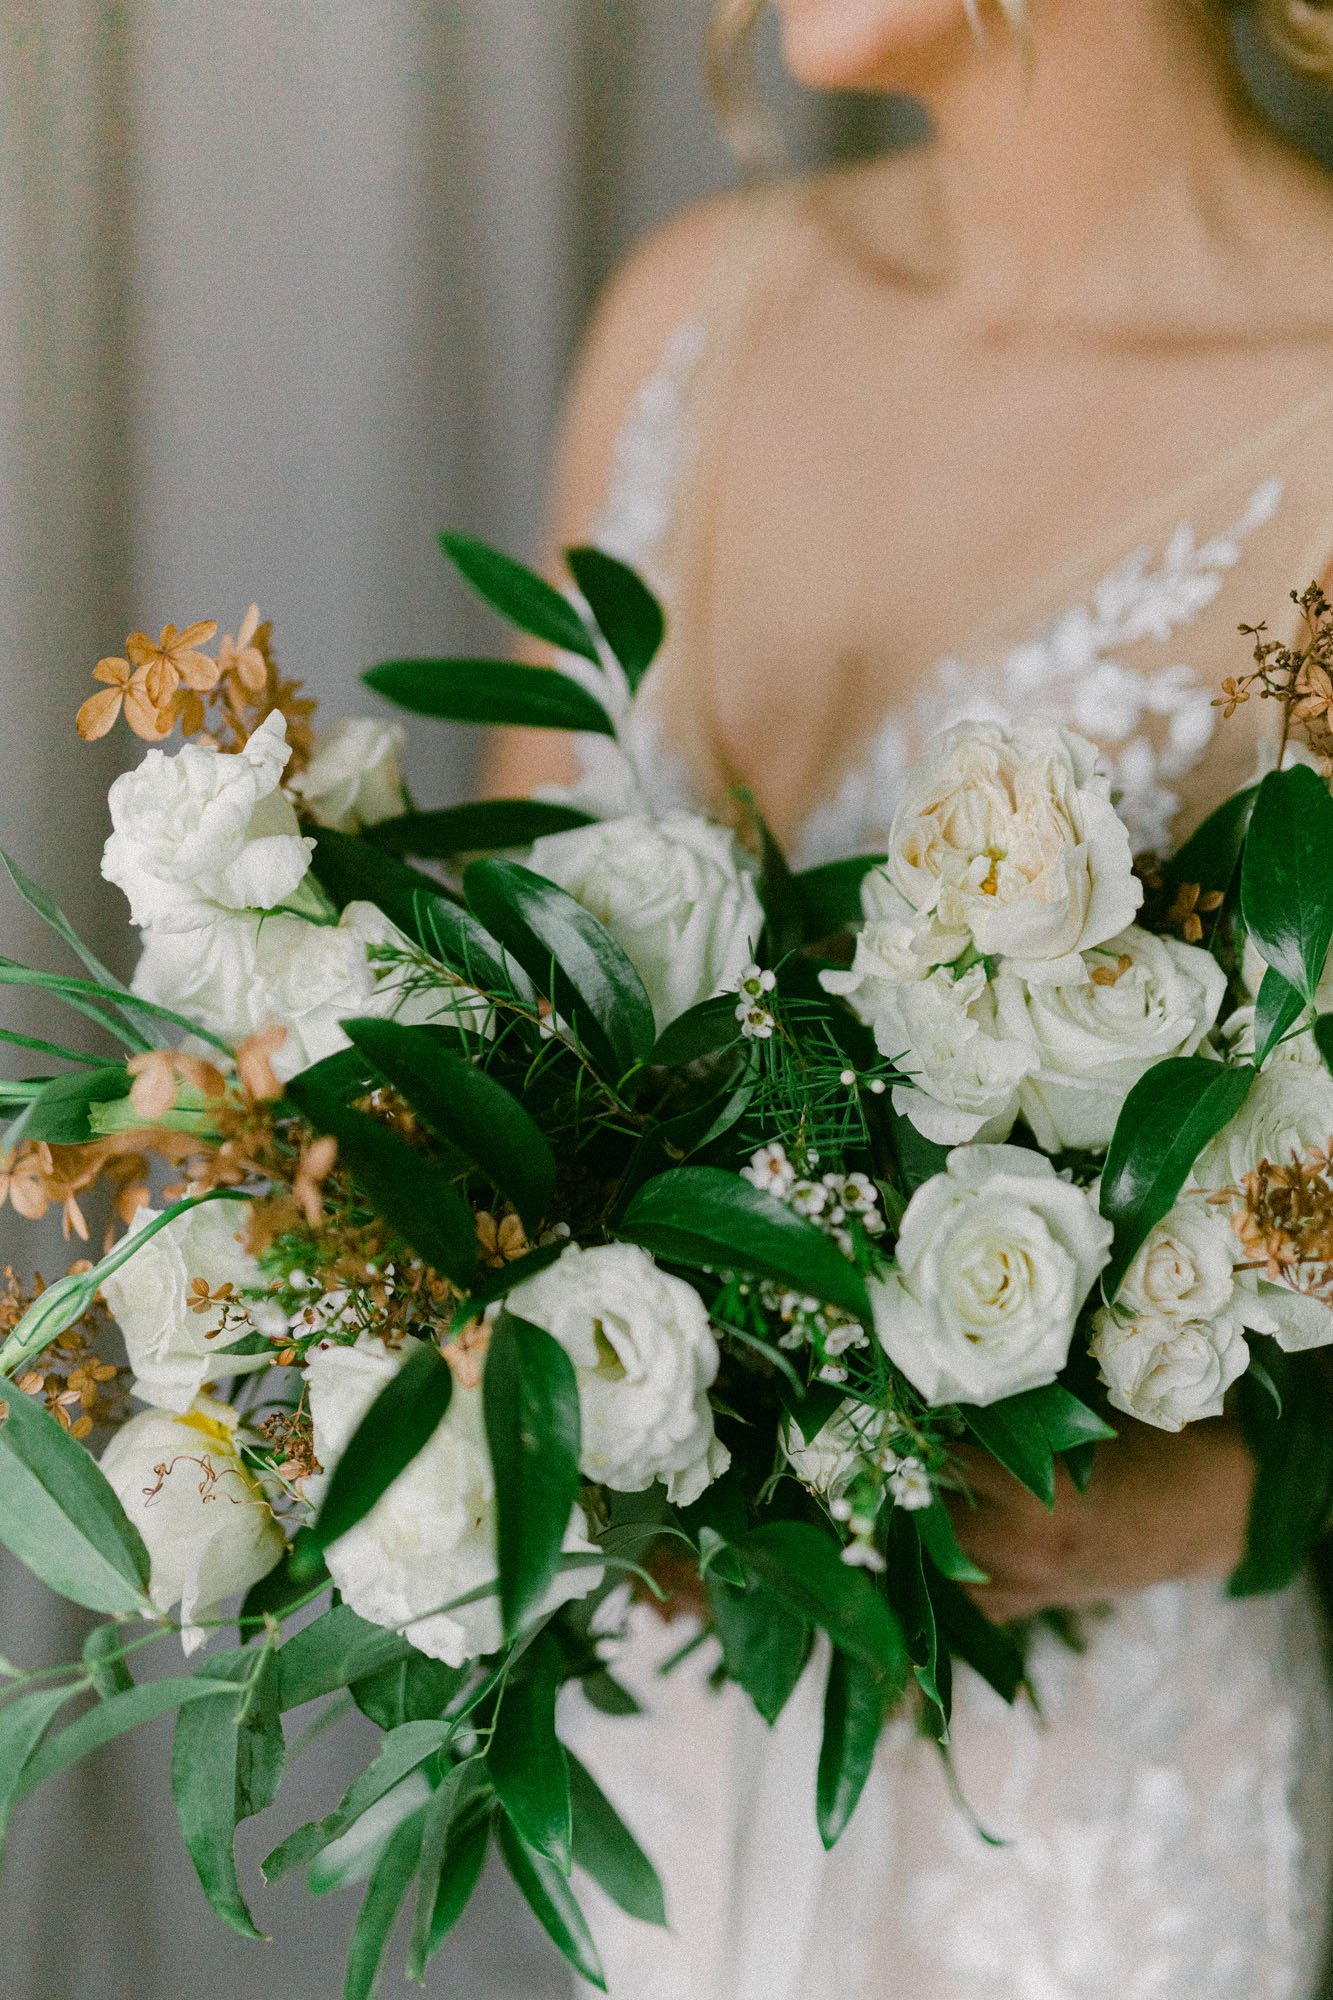  a gorgeous natural bridal bouquet of greenery and white florals 